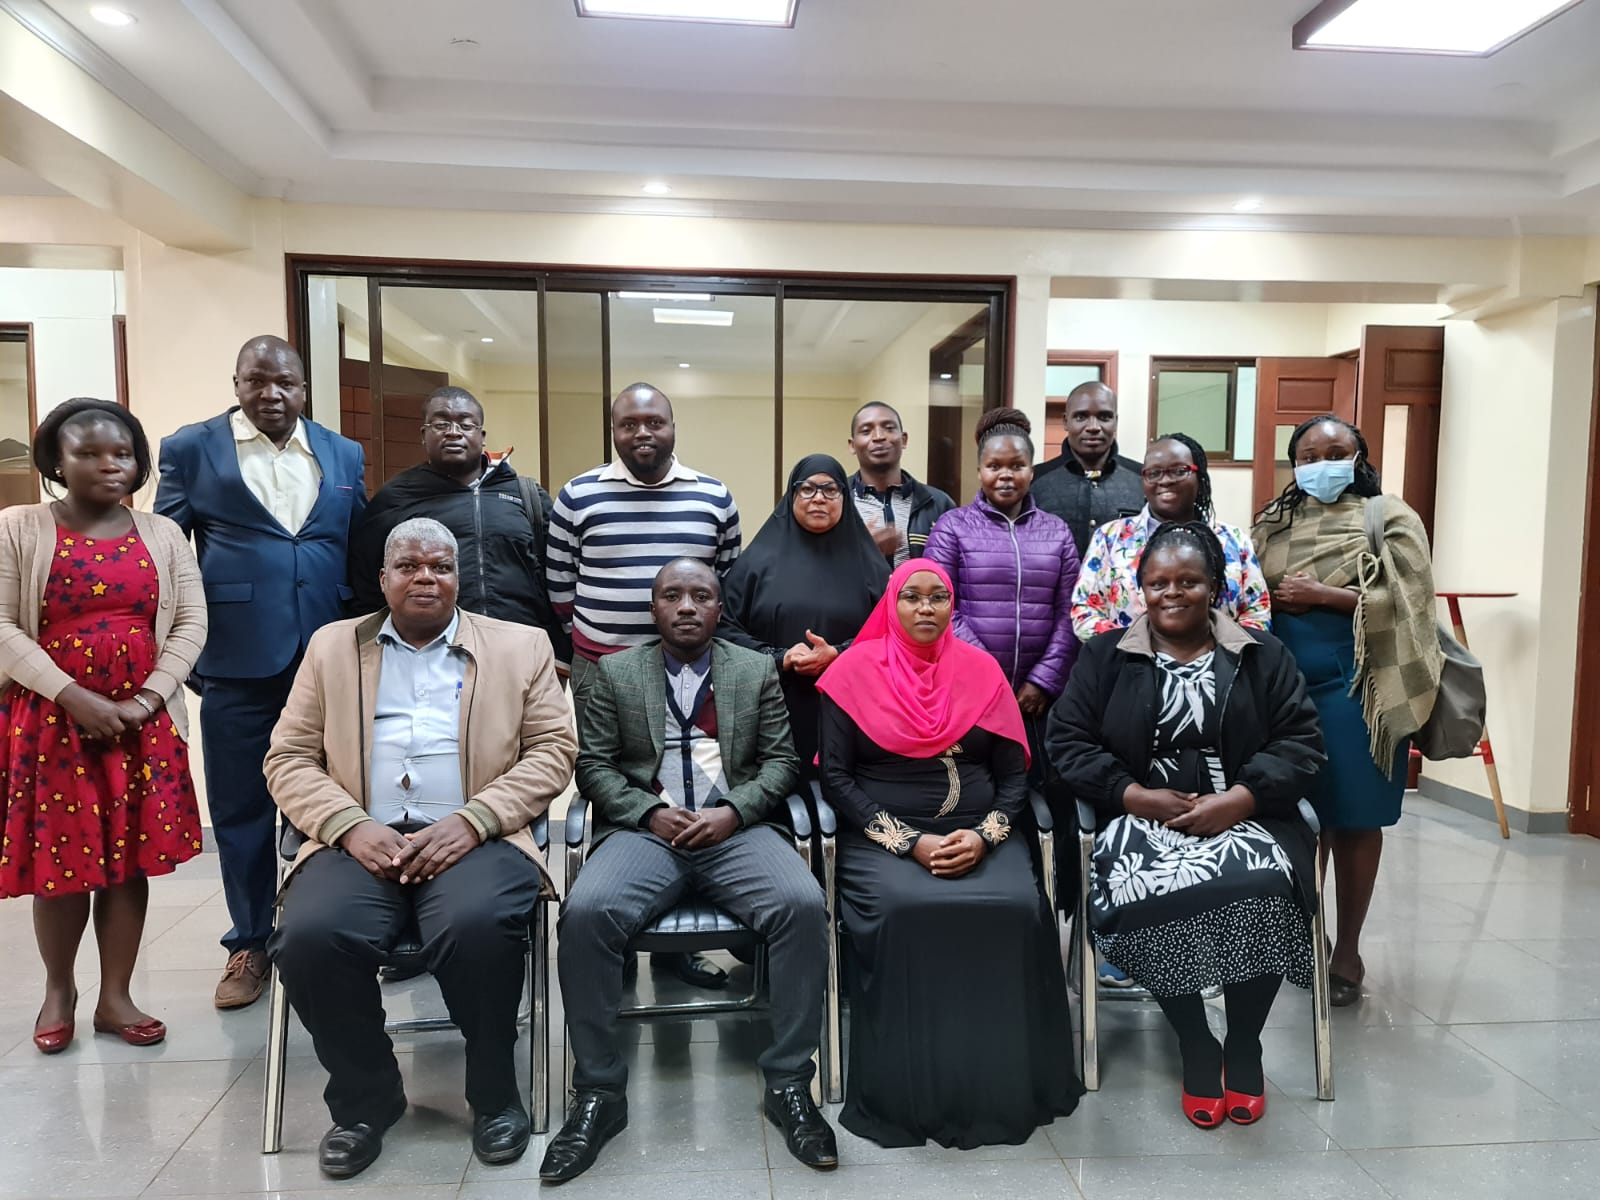 Kenyan AMR Policy Fellows conducting a Stakeholder engagement workshop during the development of the Silent Pandemic Documentary, with the Trans Nzoia County Antimicrobial Stewardship Interagency Committee (CASIC) members at the Crane Suites Hotel Kitale.